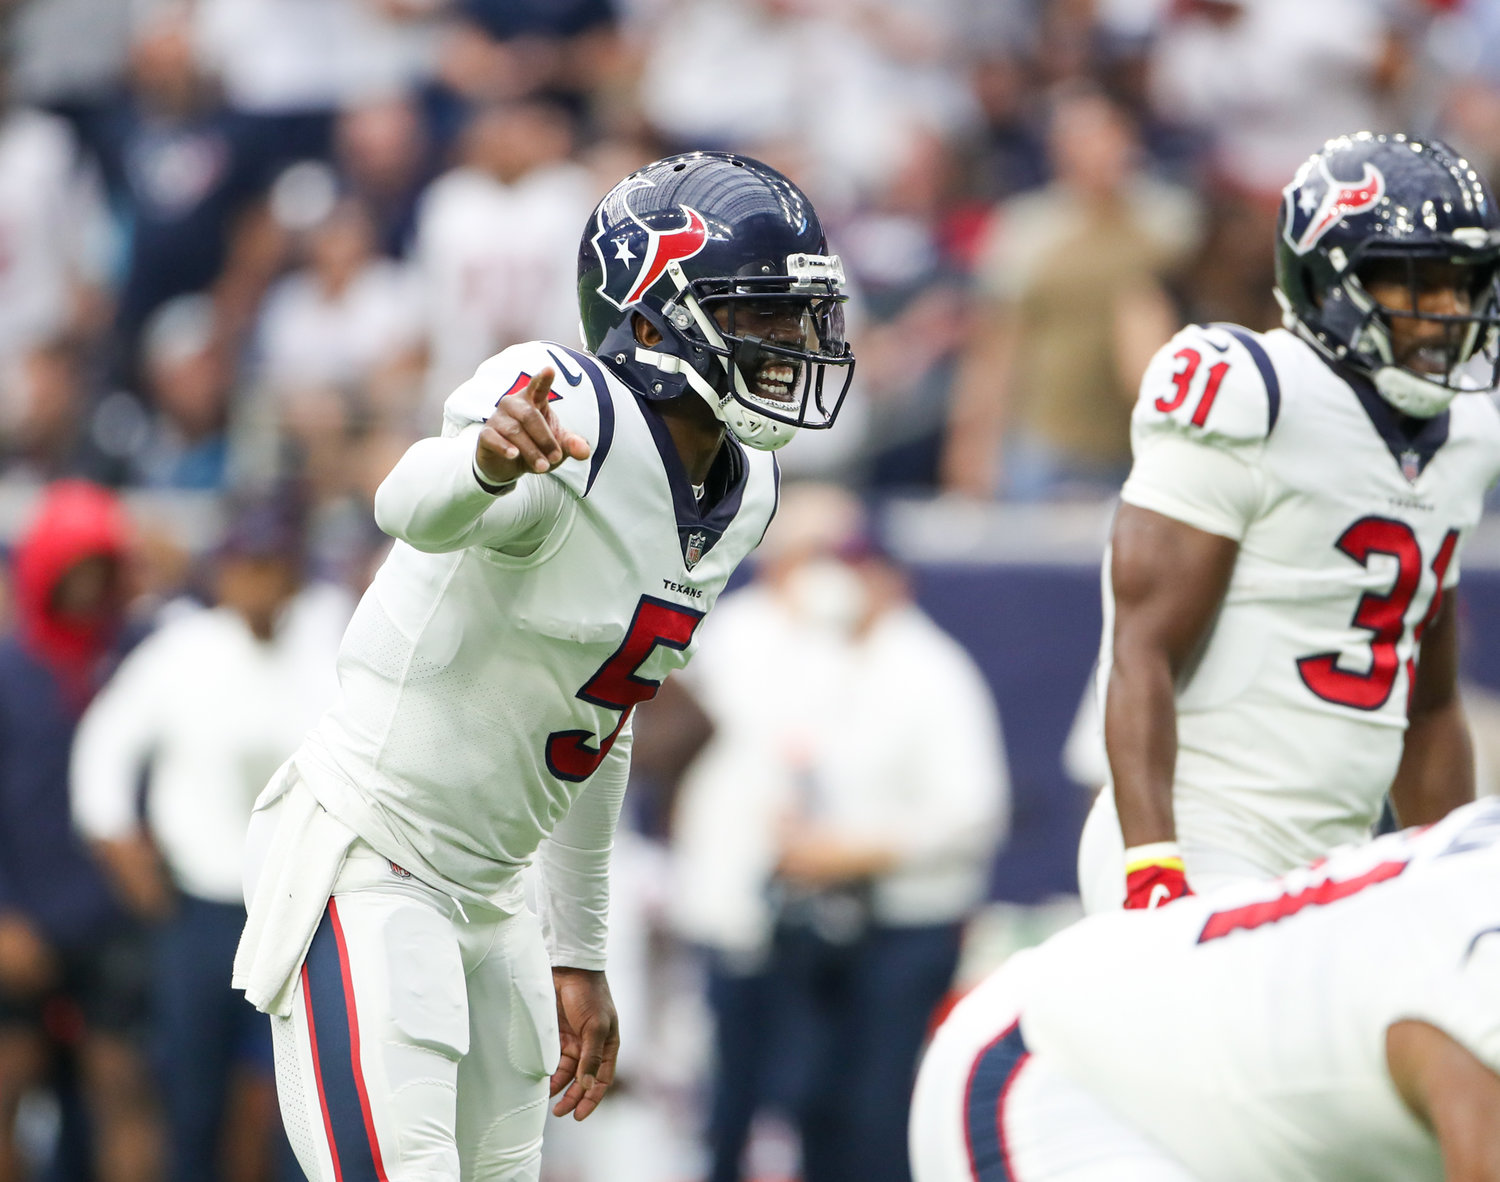 Houston Texans quarterback Tyrod Taylor (5) calls out before the snap during the first half of an NFL game between the Houston Texans and the Jacksonville Jaguars on September 12, 2021 in Houston, Texas.